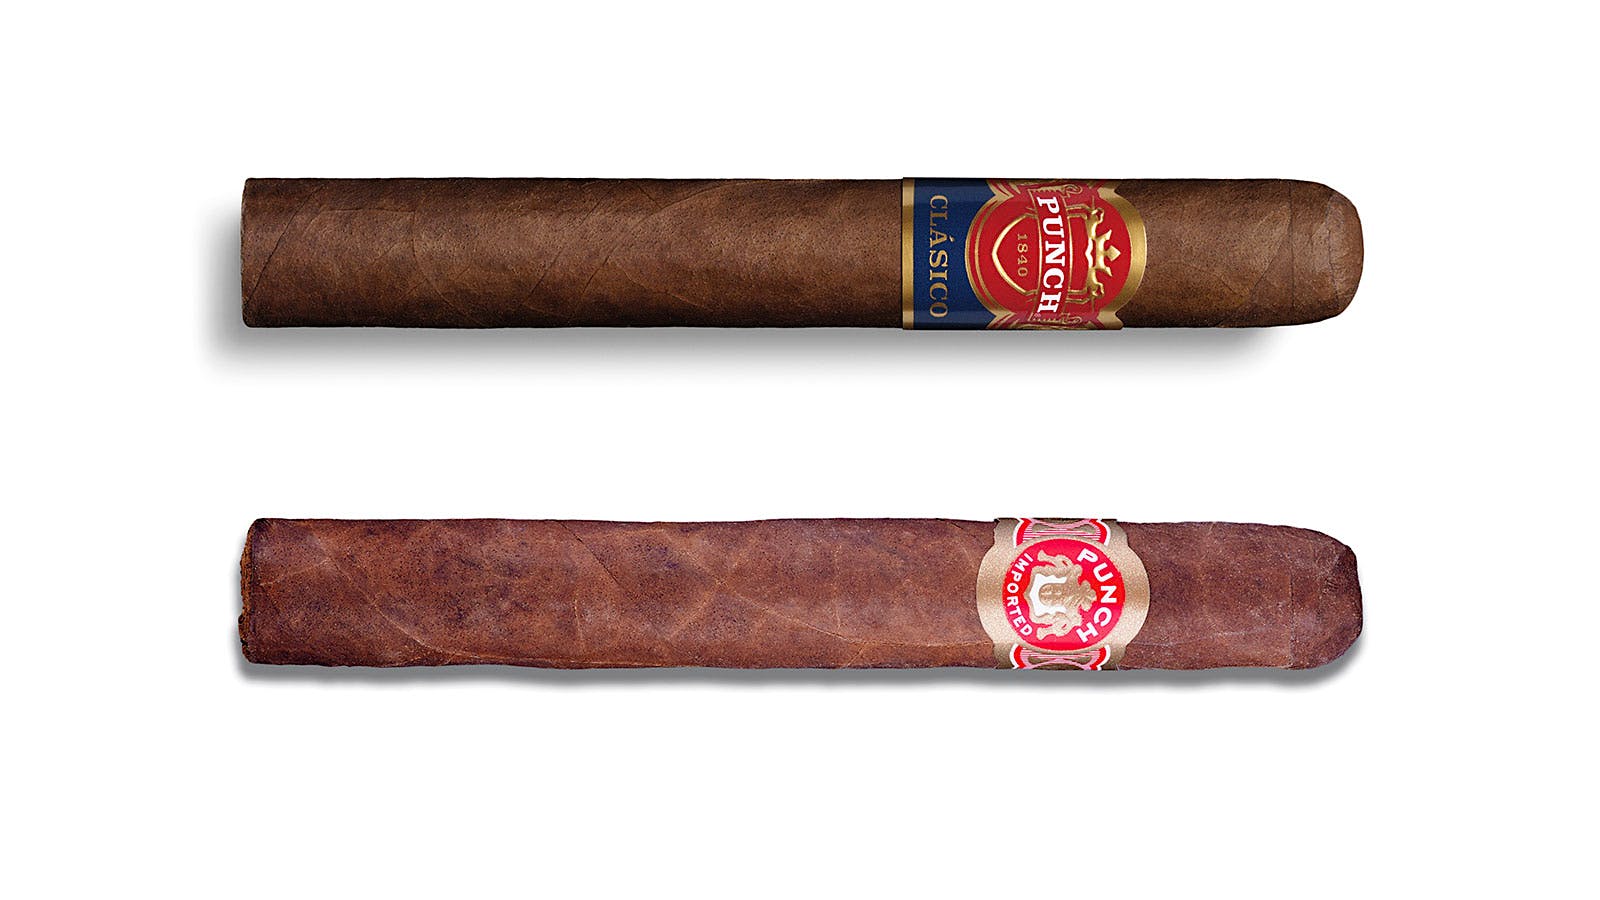 Side by side comparison of old and new Punch cigar logos.